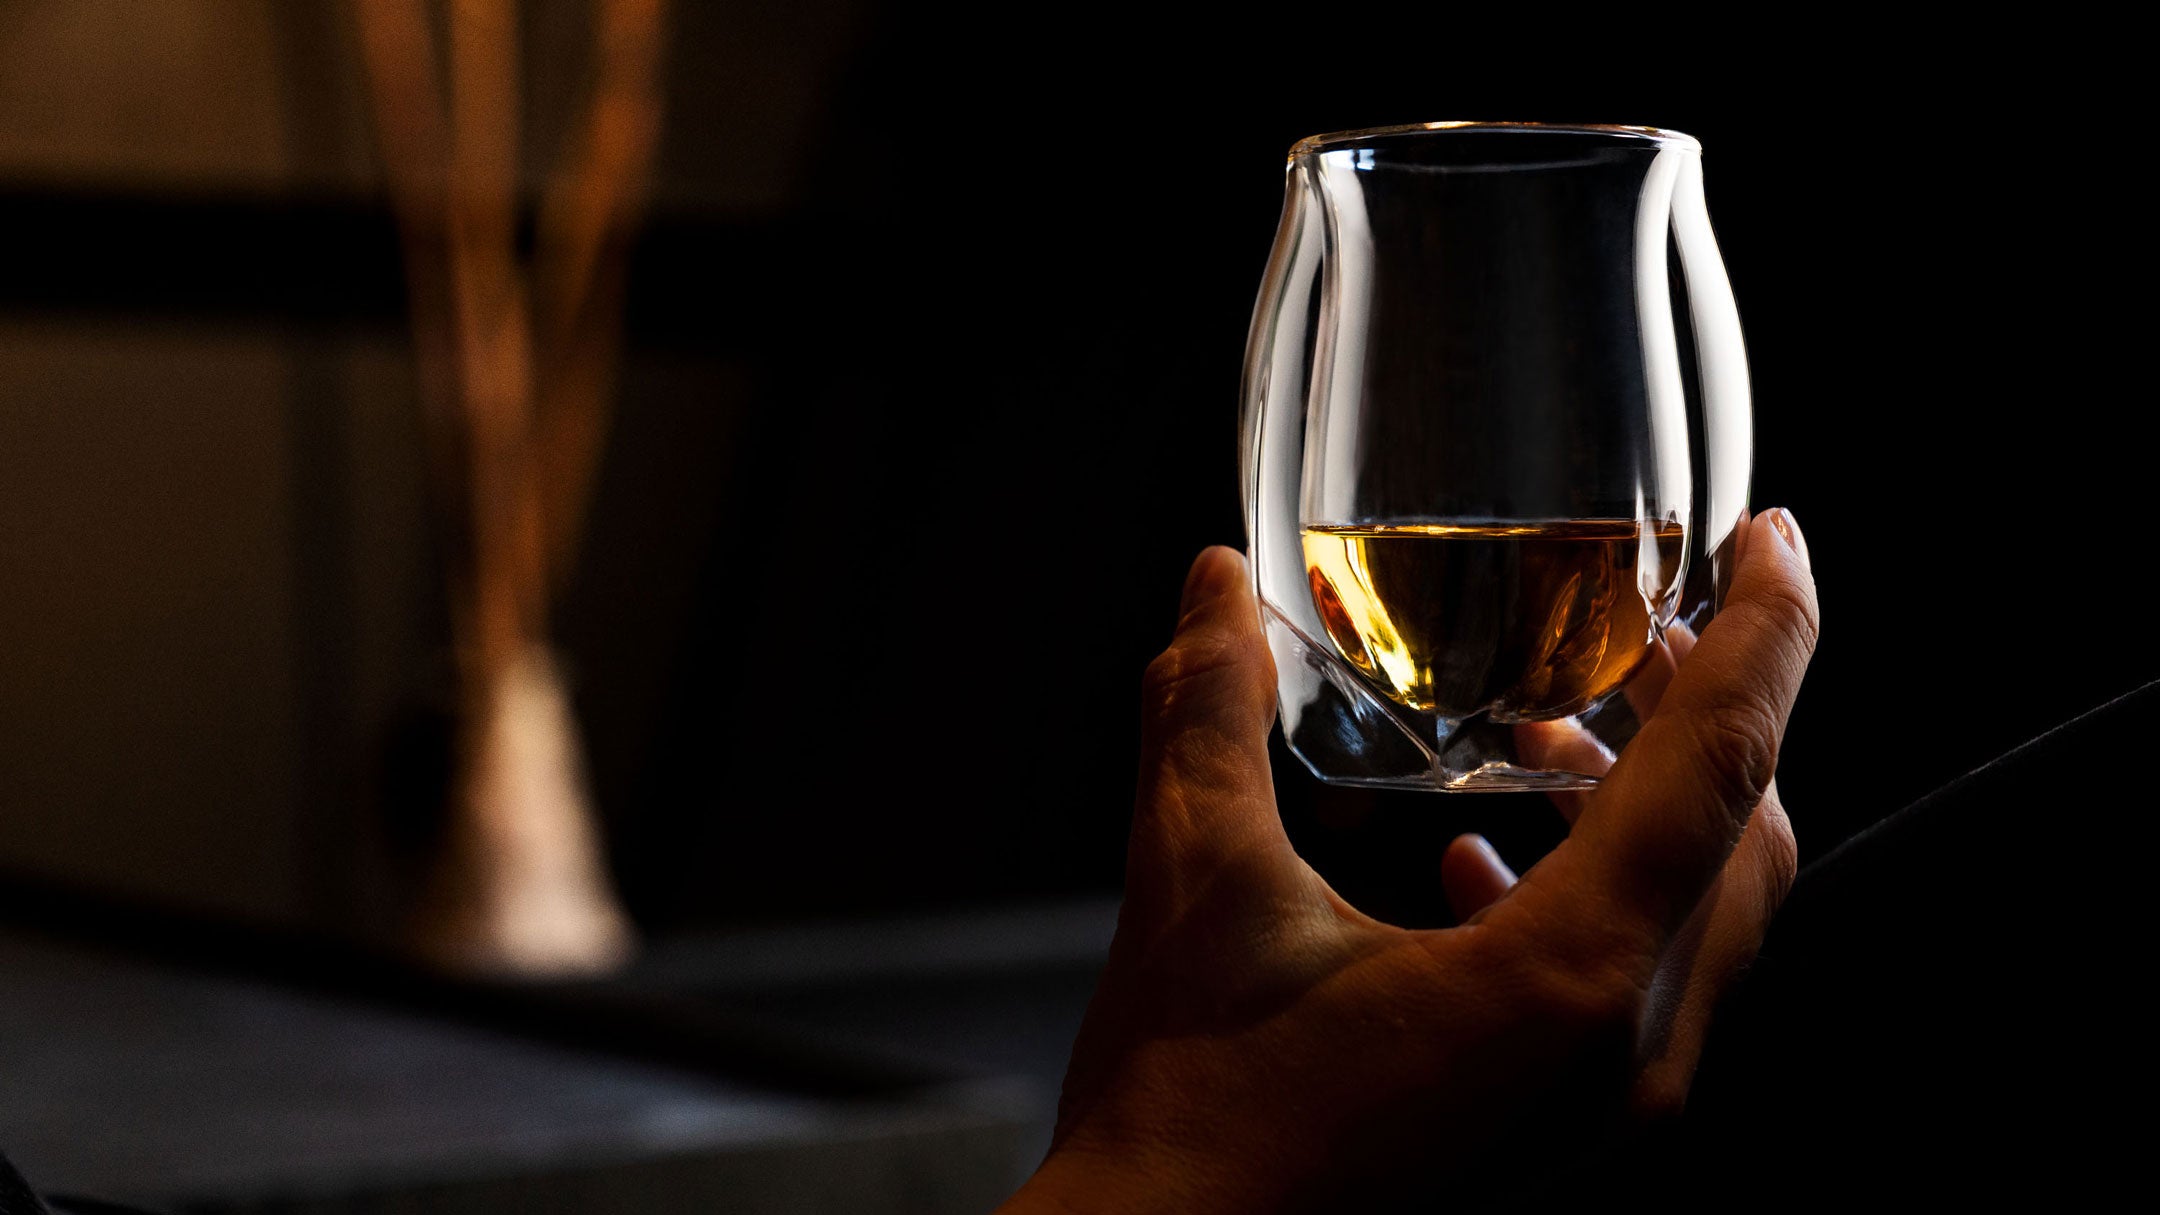 The Norlan Whisky Glass is a perfect gift for Mother's Day. 